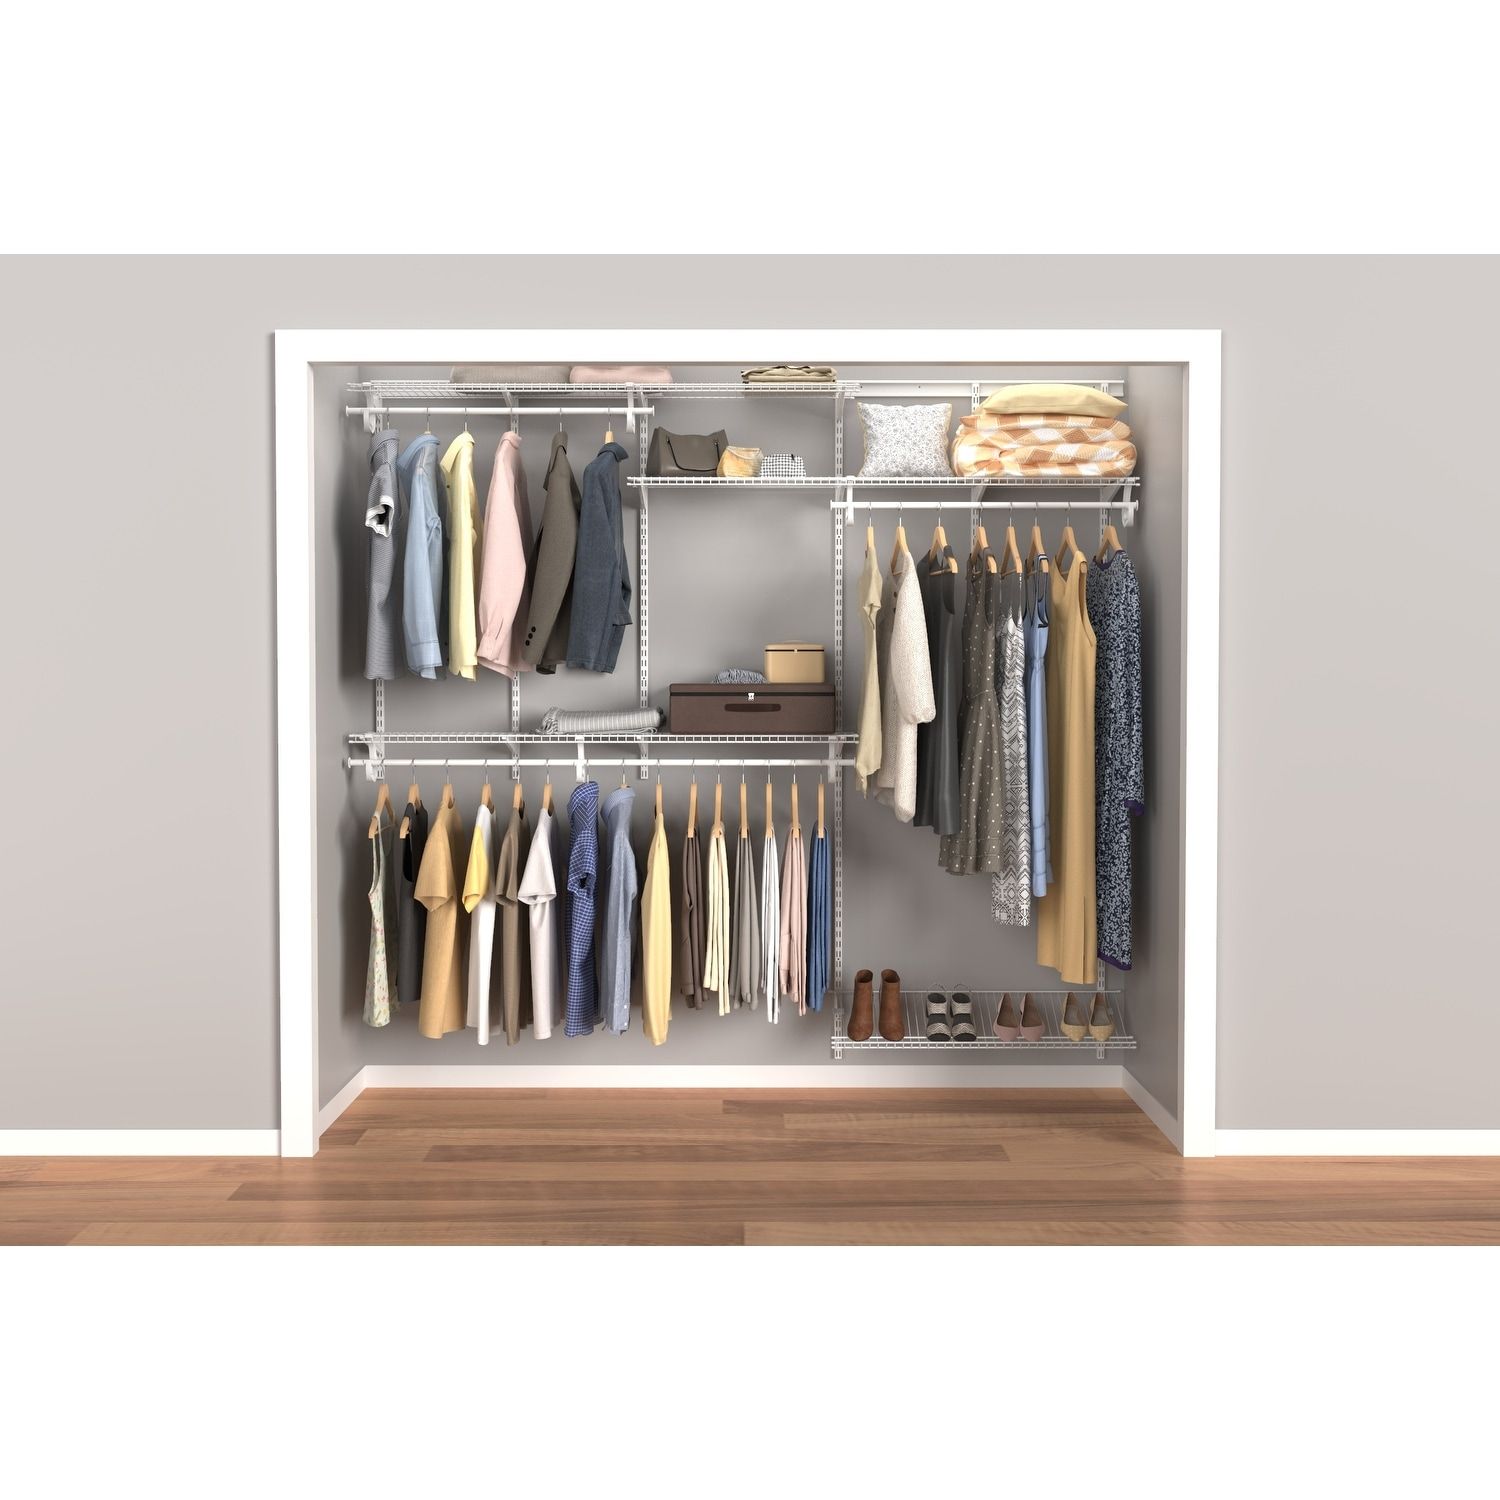 Closetmaid Shelftrack 60 96 Inch Wide Adjustable Closet Organizer – On Sale  – Bed Bath & Beyond – 10581832 Inside 96 Inches Wardrobes (View 6 of 15)